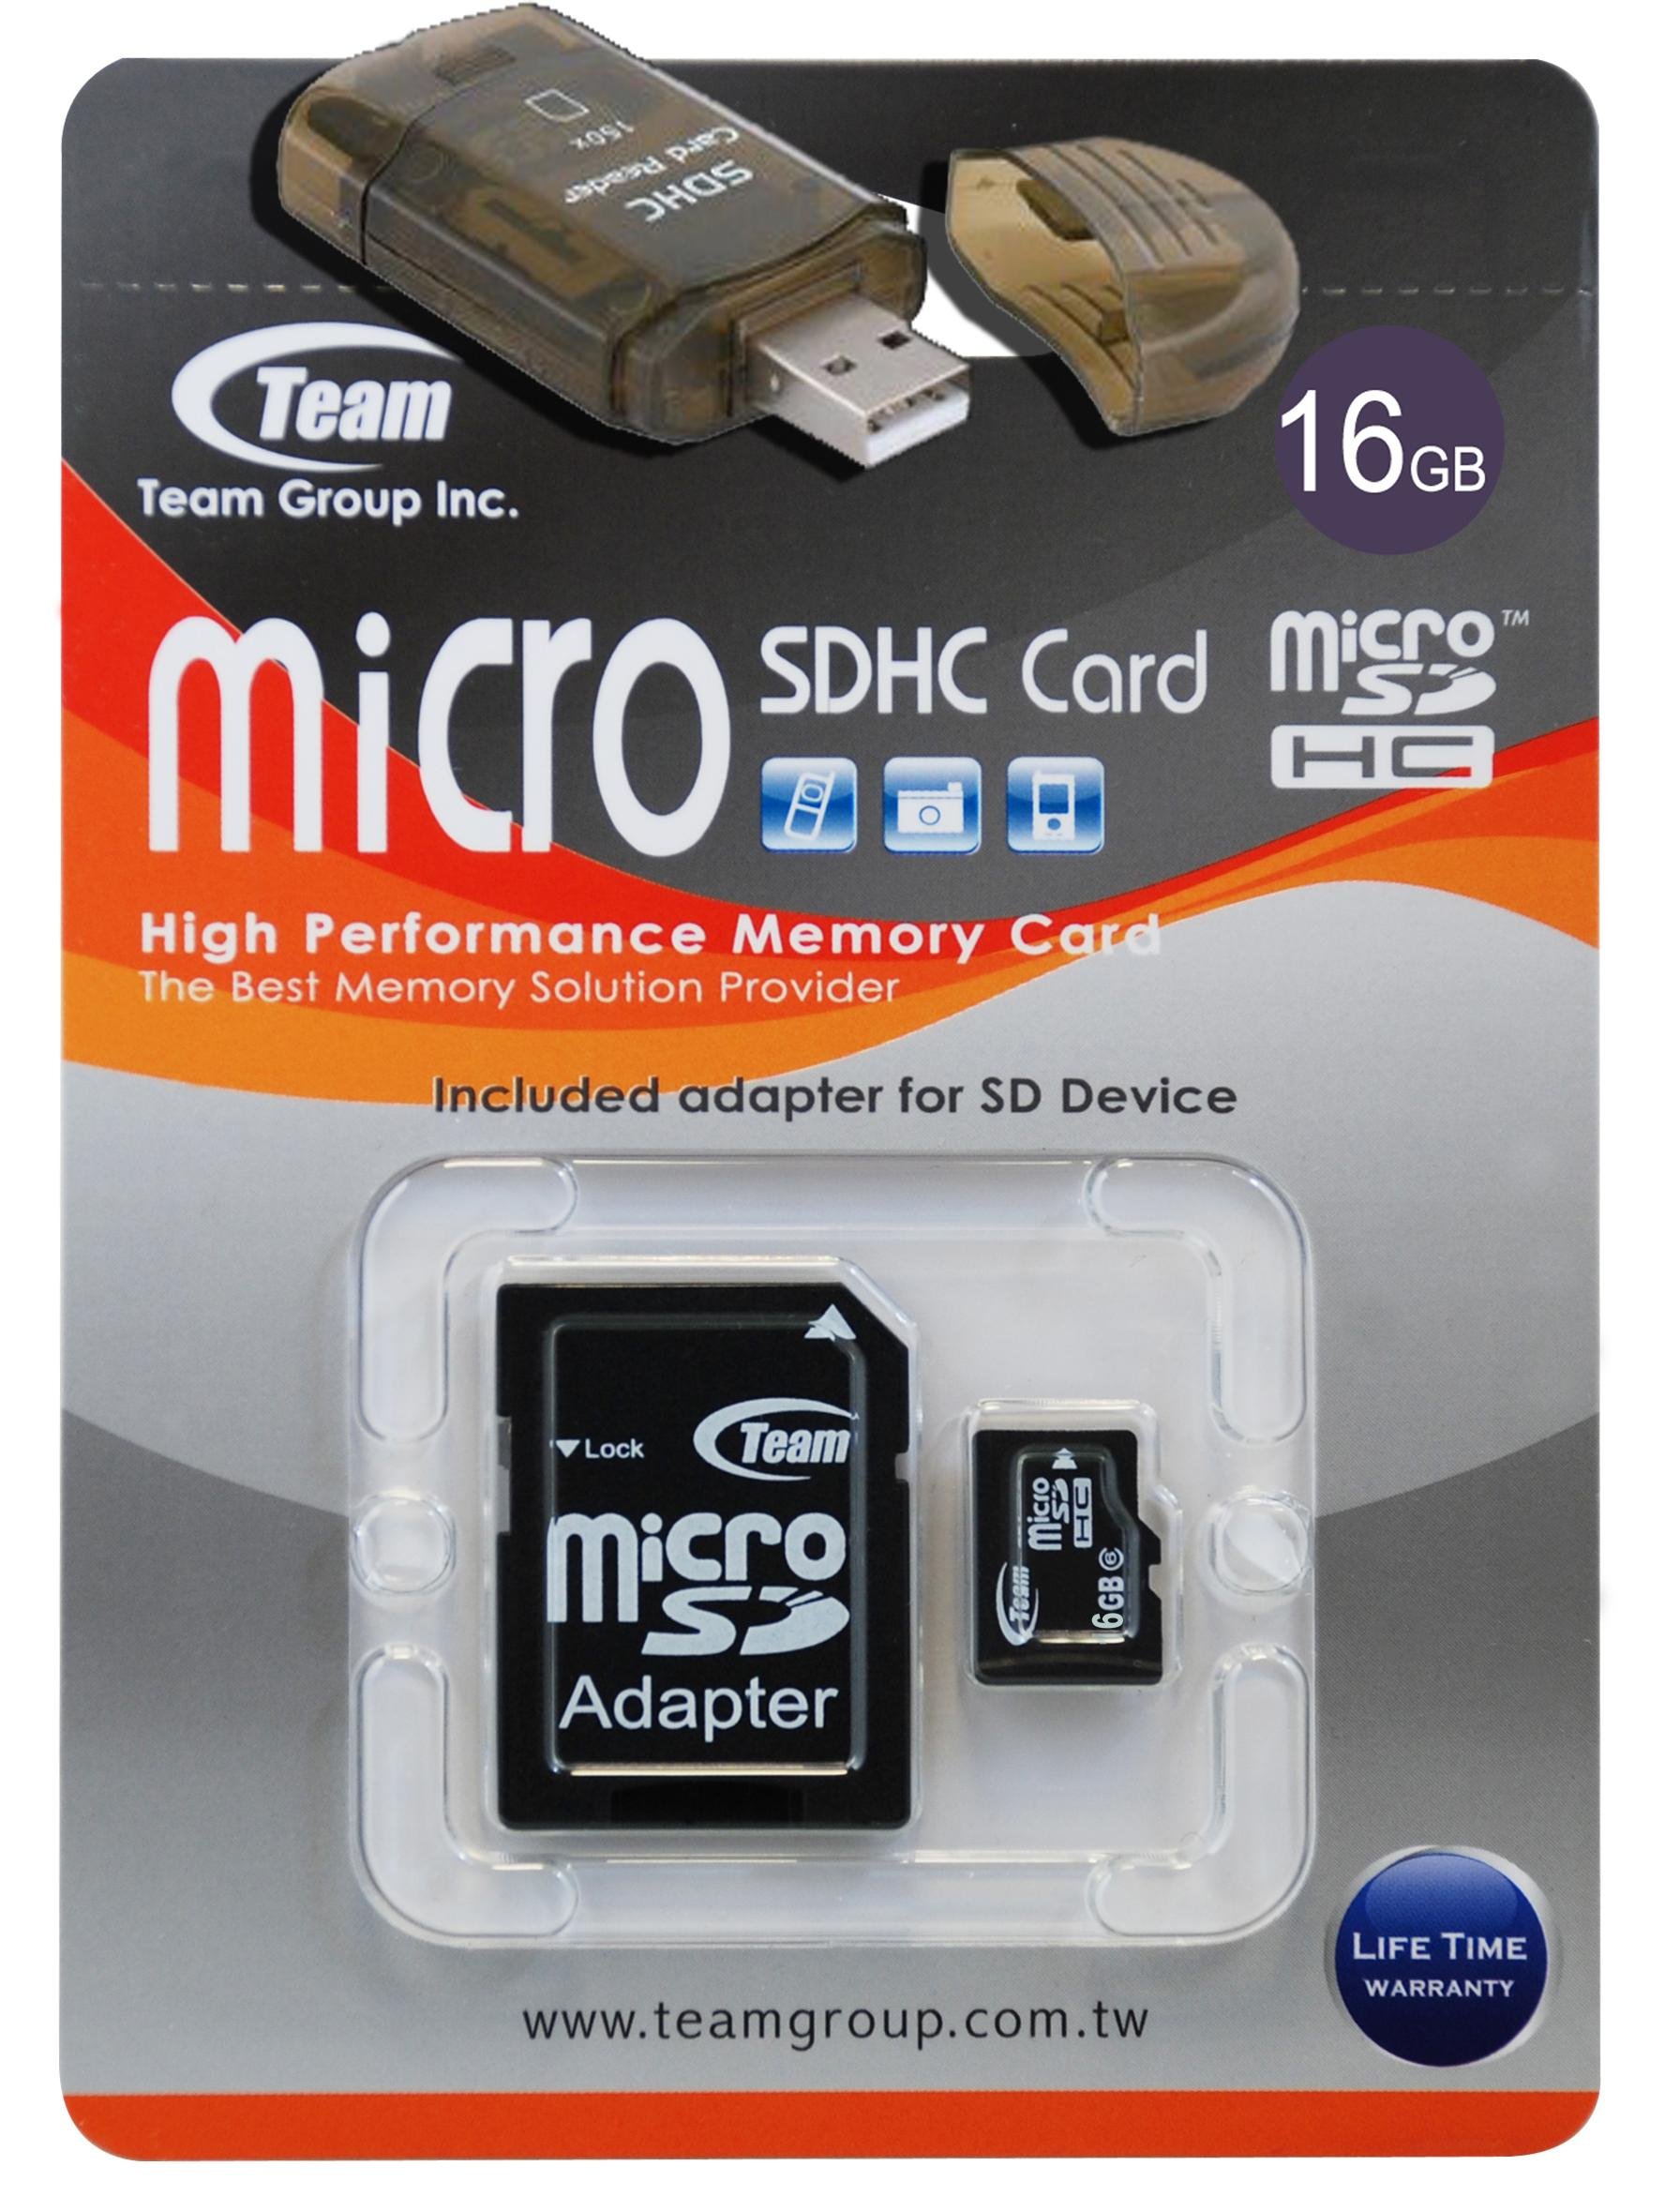 16GB Turbo Speed Class 6 MicroSDHC Memory Card For LG Georgia Glance Glimmer. High Speed Card Comes with a free SD and USB Ad